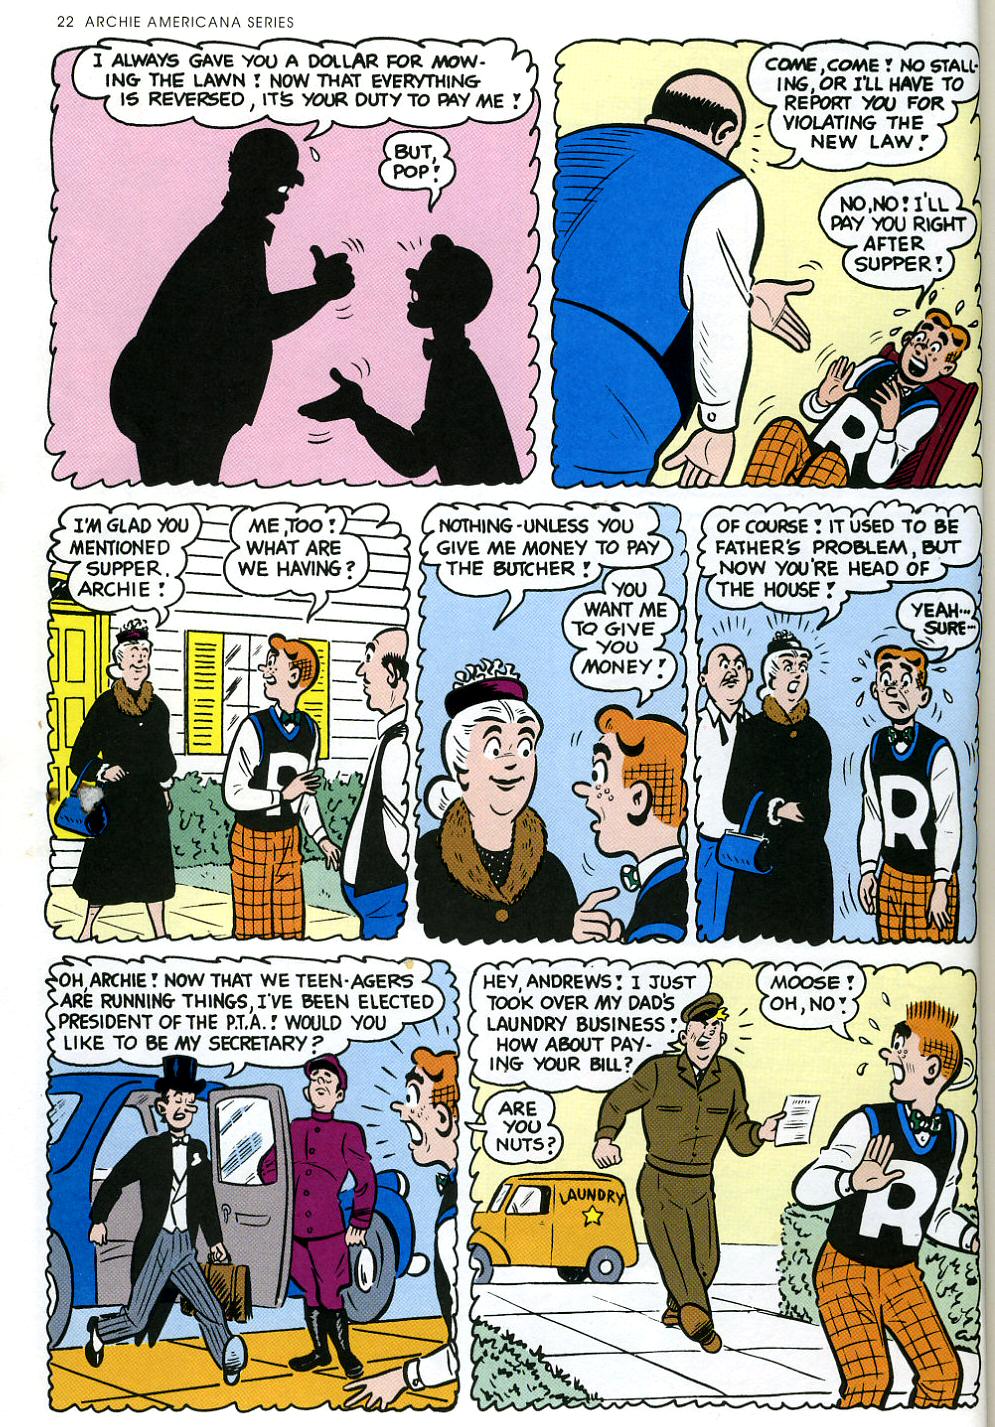 Read online Archie Americana Series comic -  Issue # TPB 2 - 24